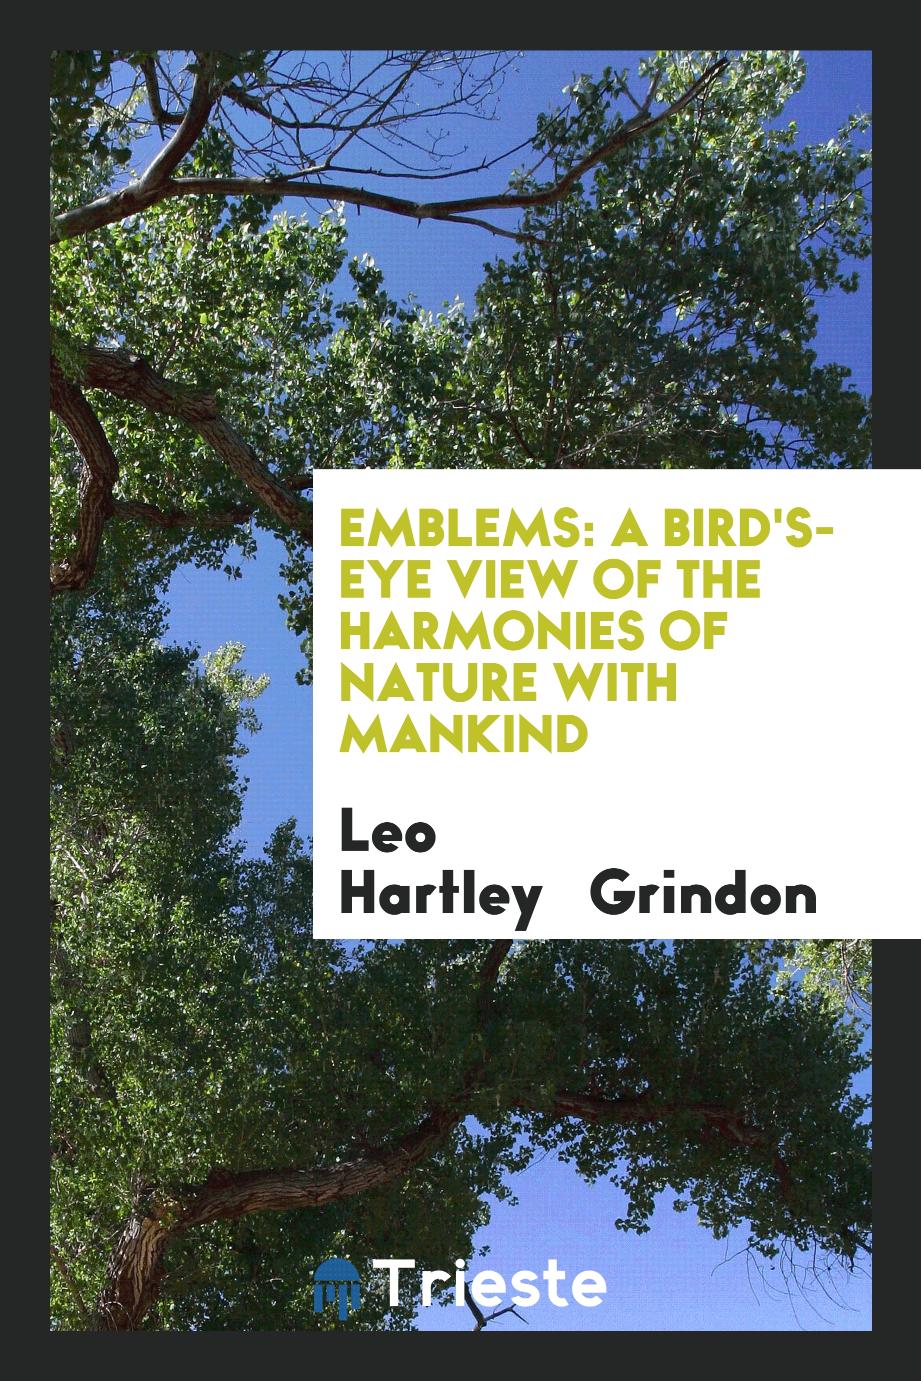 Emblems: A Bird's-Eye View of the Harmonies of Nature with Mankind